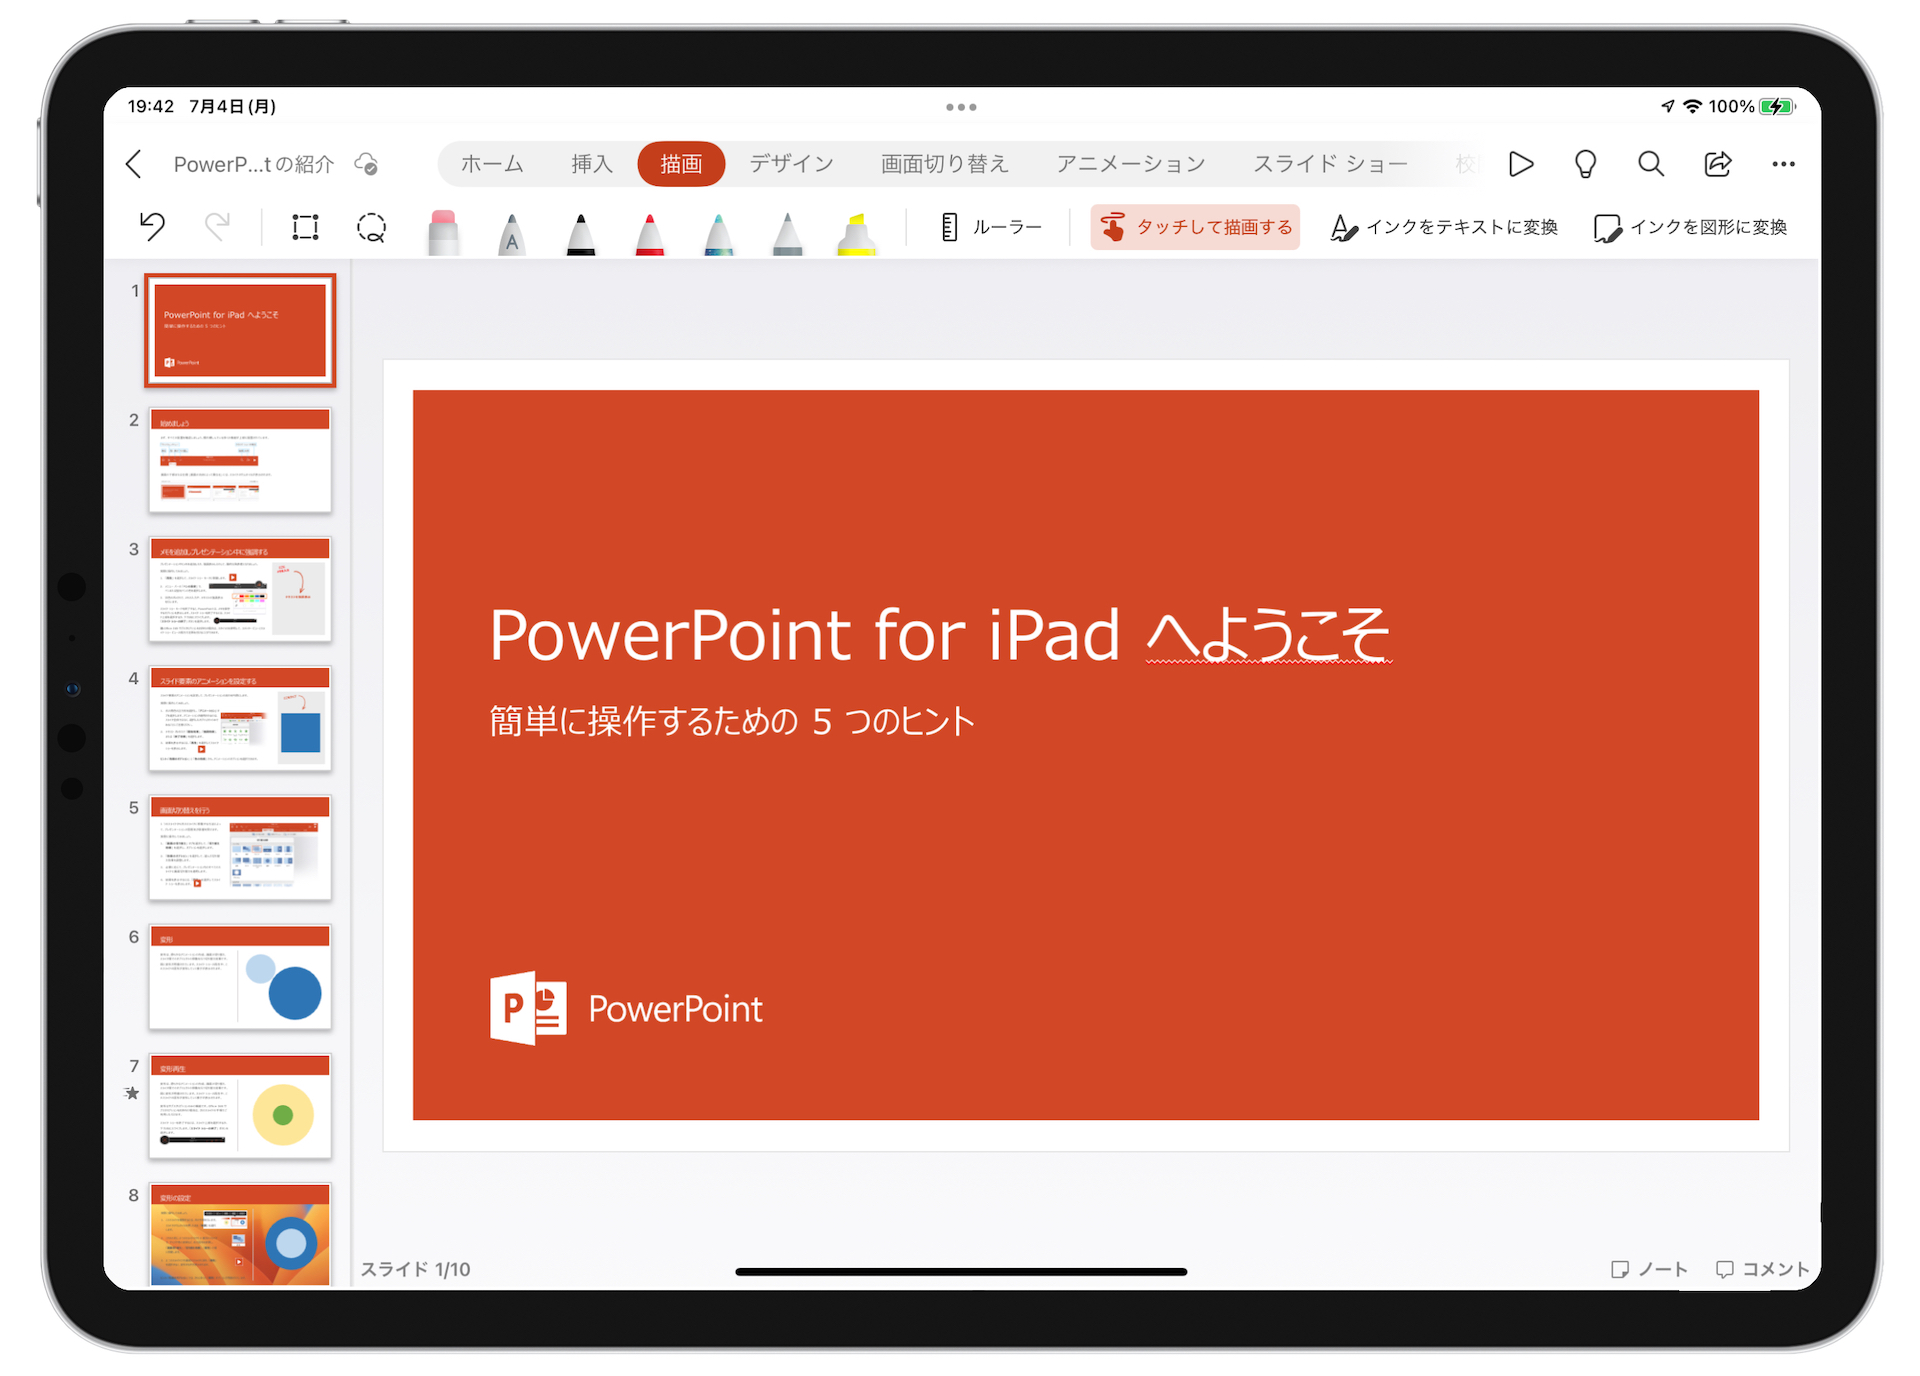 PowerPoint for iPad v2.63 update